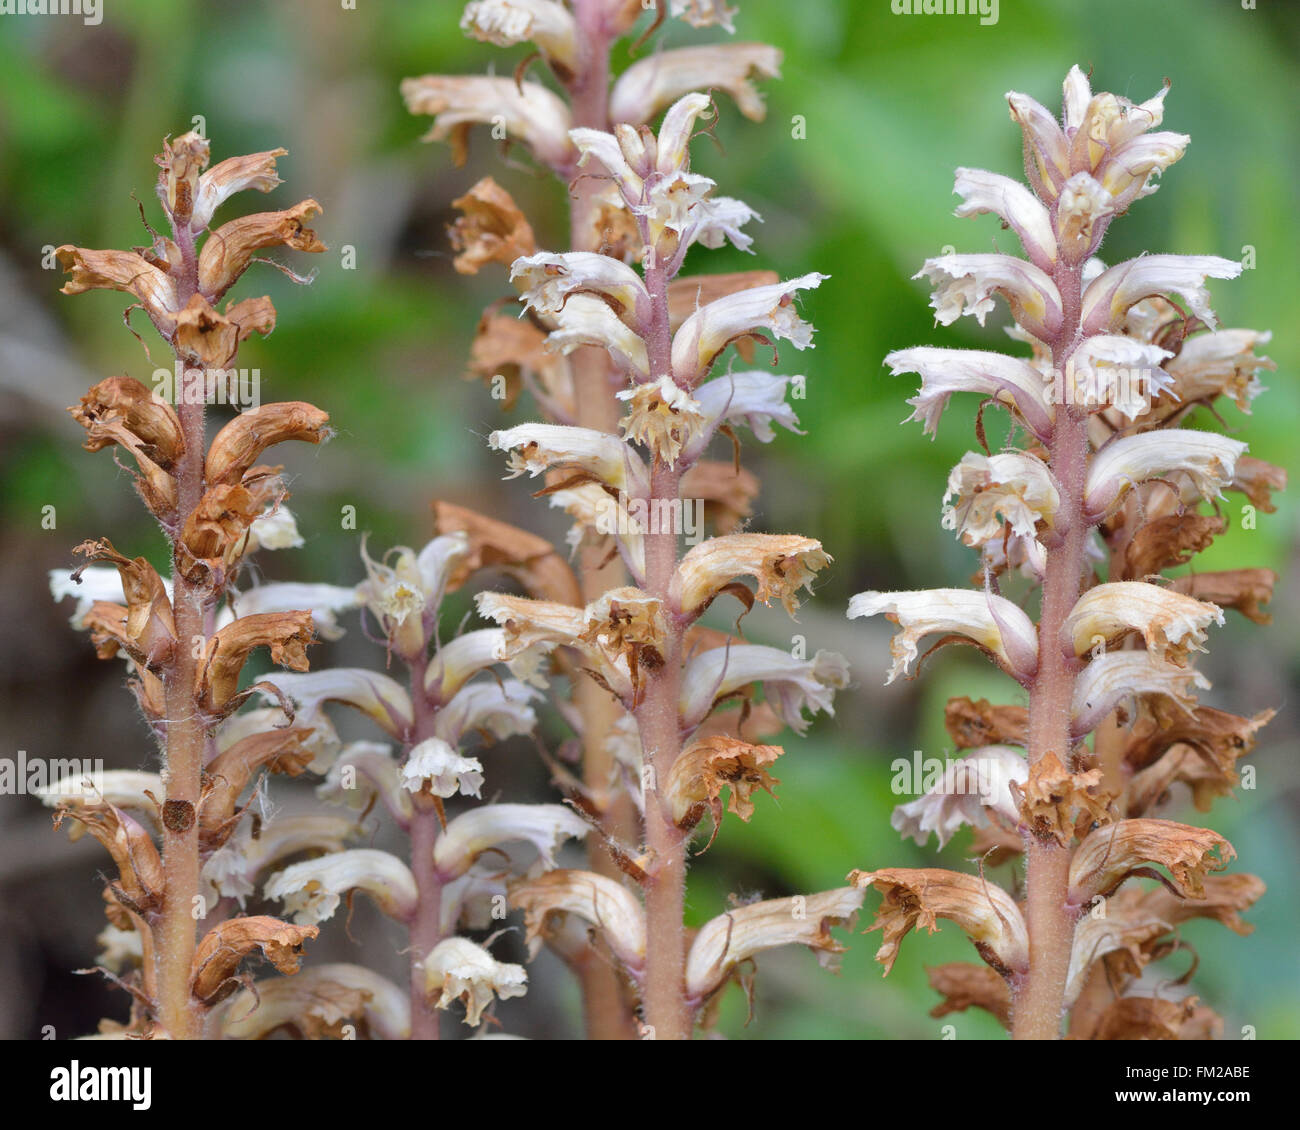 Ivy broomrape (Orobanche hederae) close up of flowers. Close up of lilac white and brown flowers of this parasitic plant Stock Photo